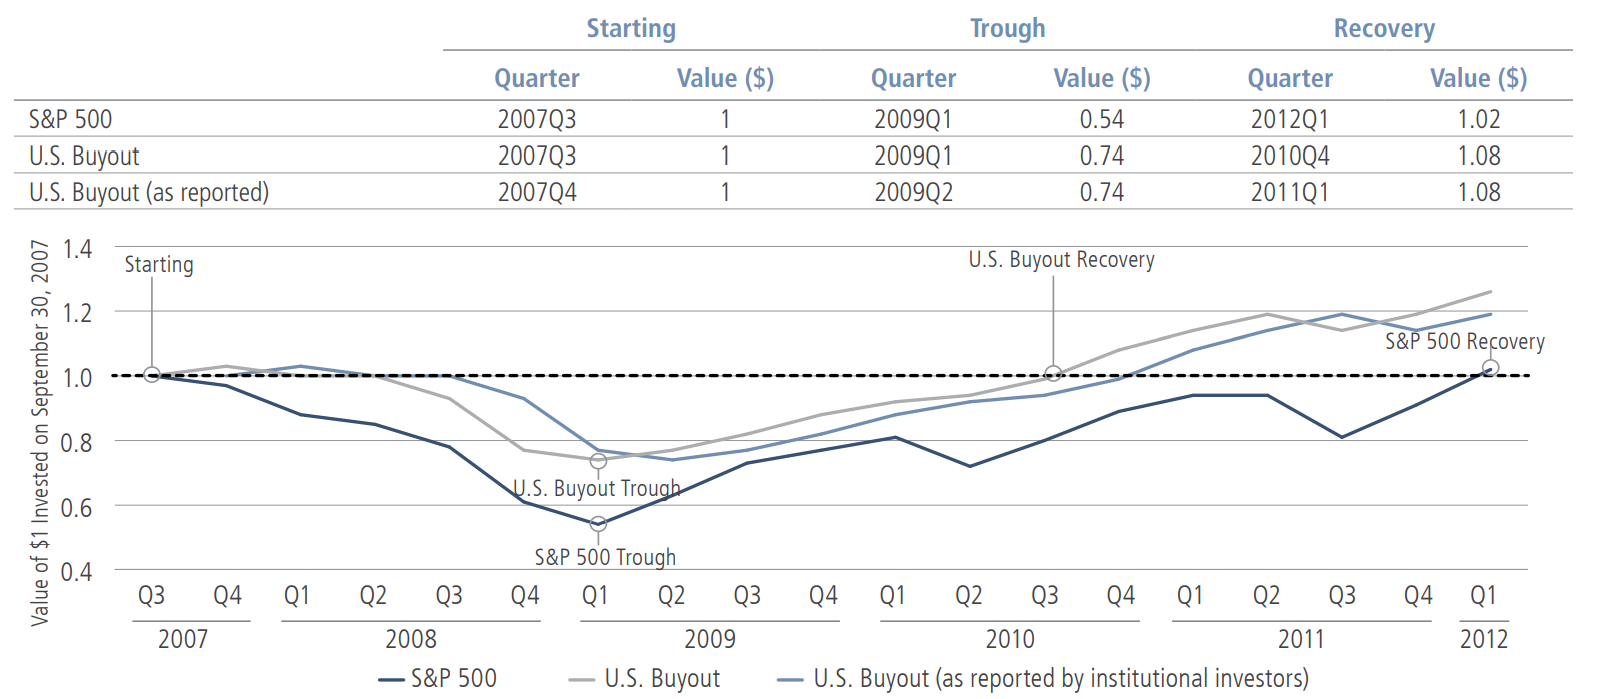 The Role Of Private Equity During Market Downturns: Performance Of S&P500 And U.S. Buyout Funds (Q3 2007 – Q1 2012)